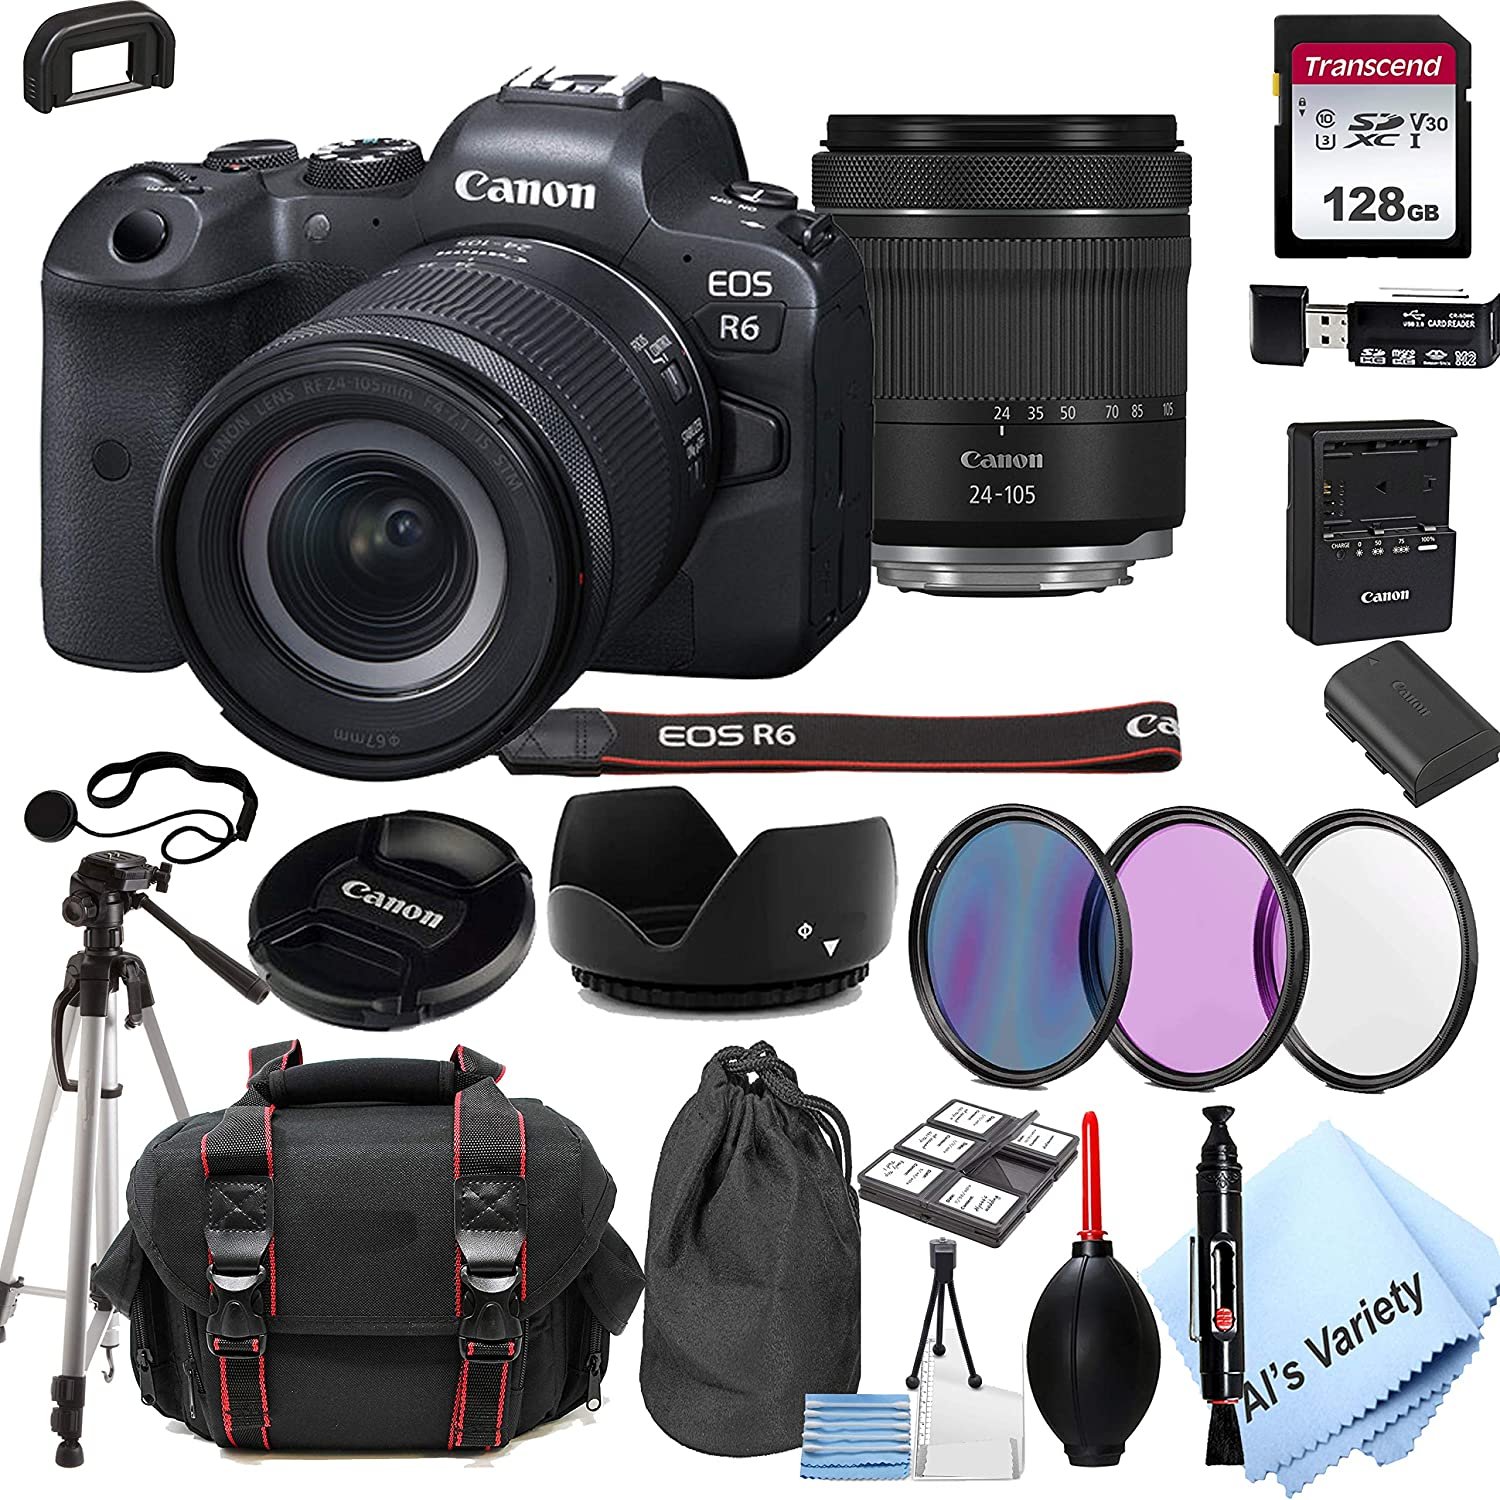 Canon EOS R6 Mirrorless Digital Camera with 24-105mm f/4-7.1 Lens Bundle + 128GB Memory + Case + Filters + Tripod 24pc Bundle - image 1 of 8